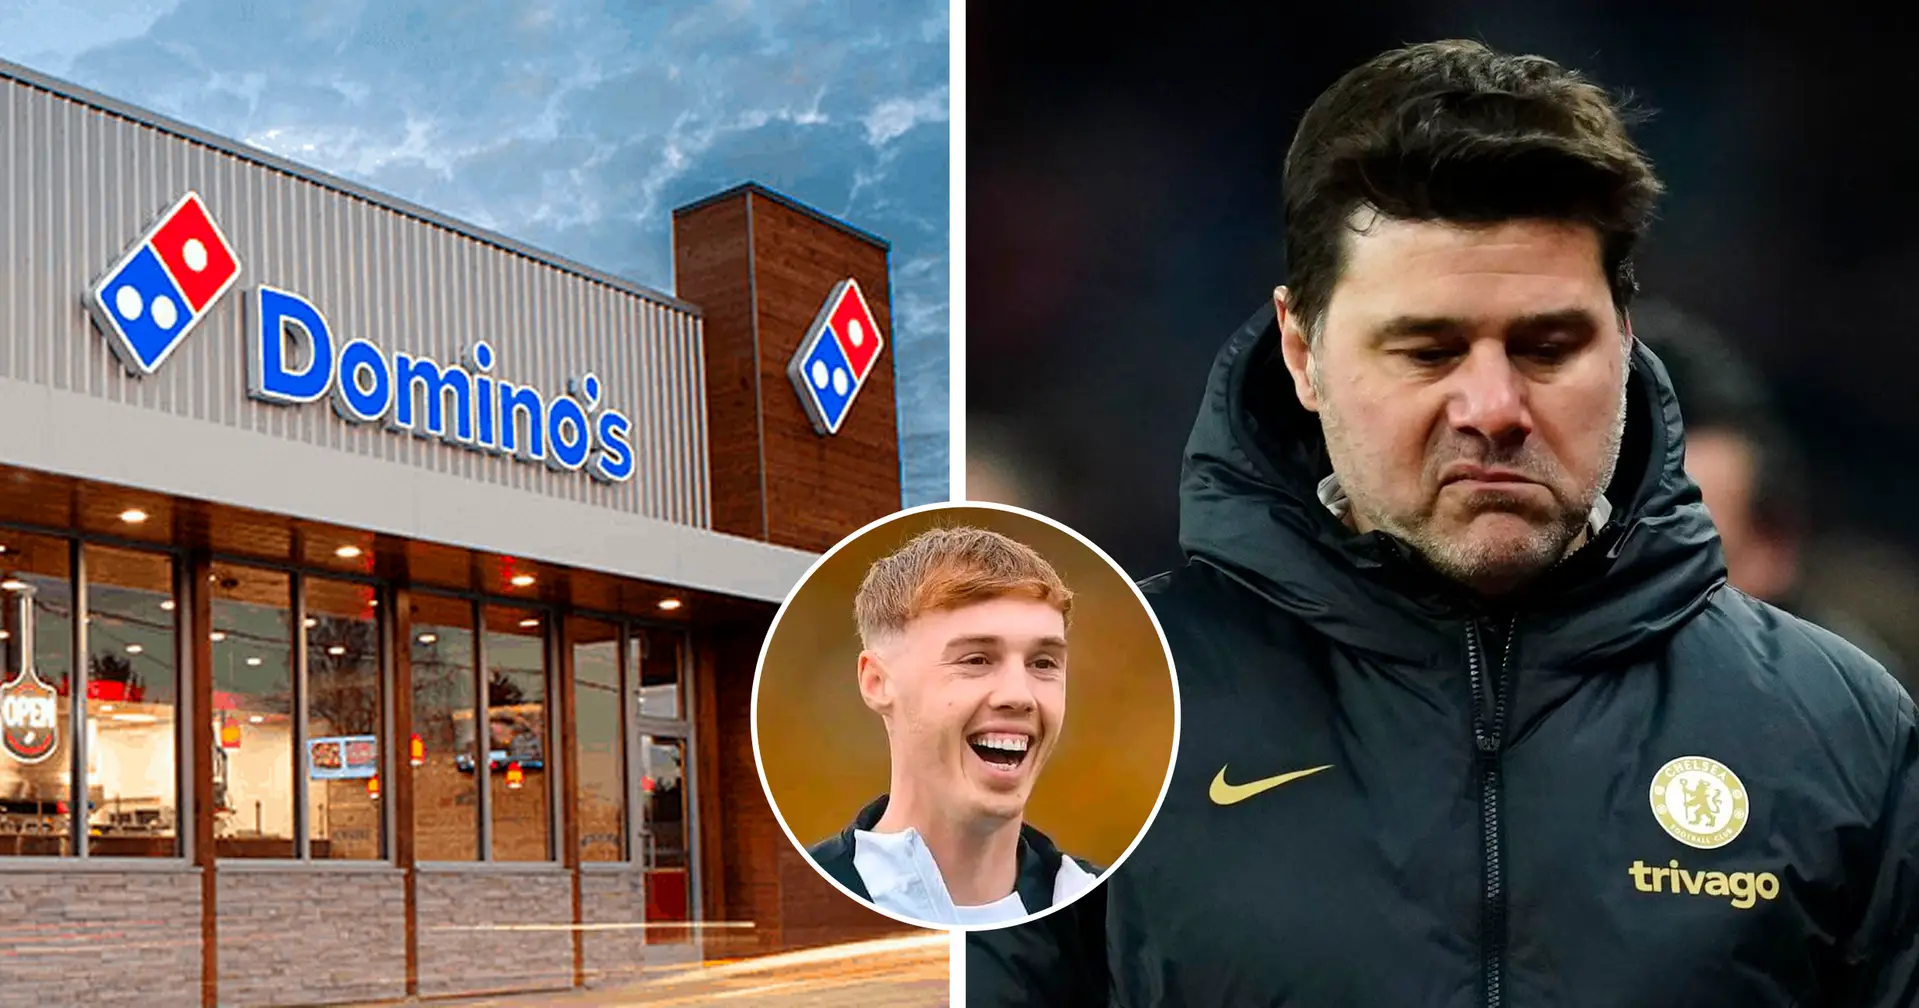 Spotted: Domino's Pizza brutally roasting Chelsea after the 0-5 Arsenal defeat